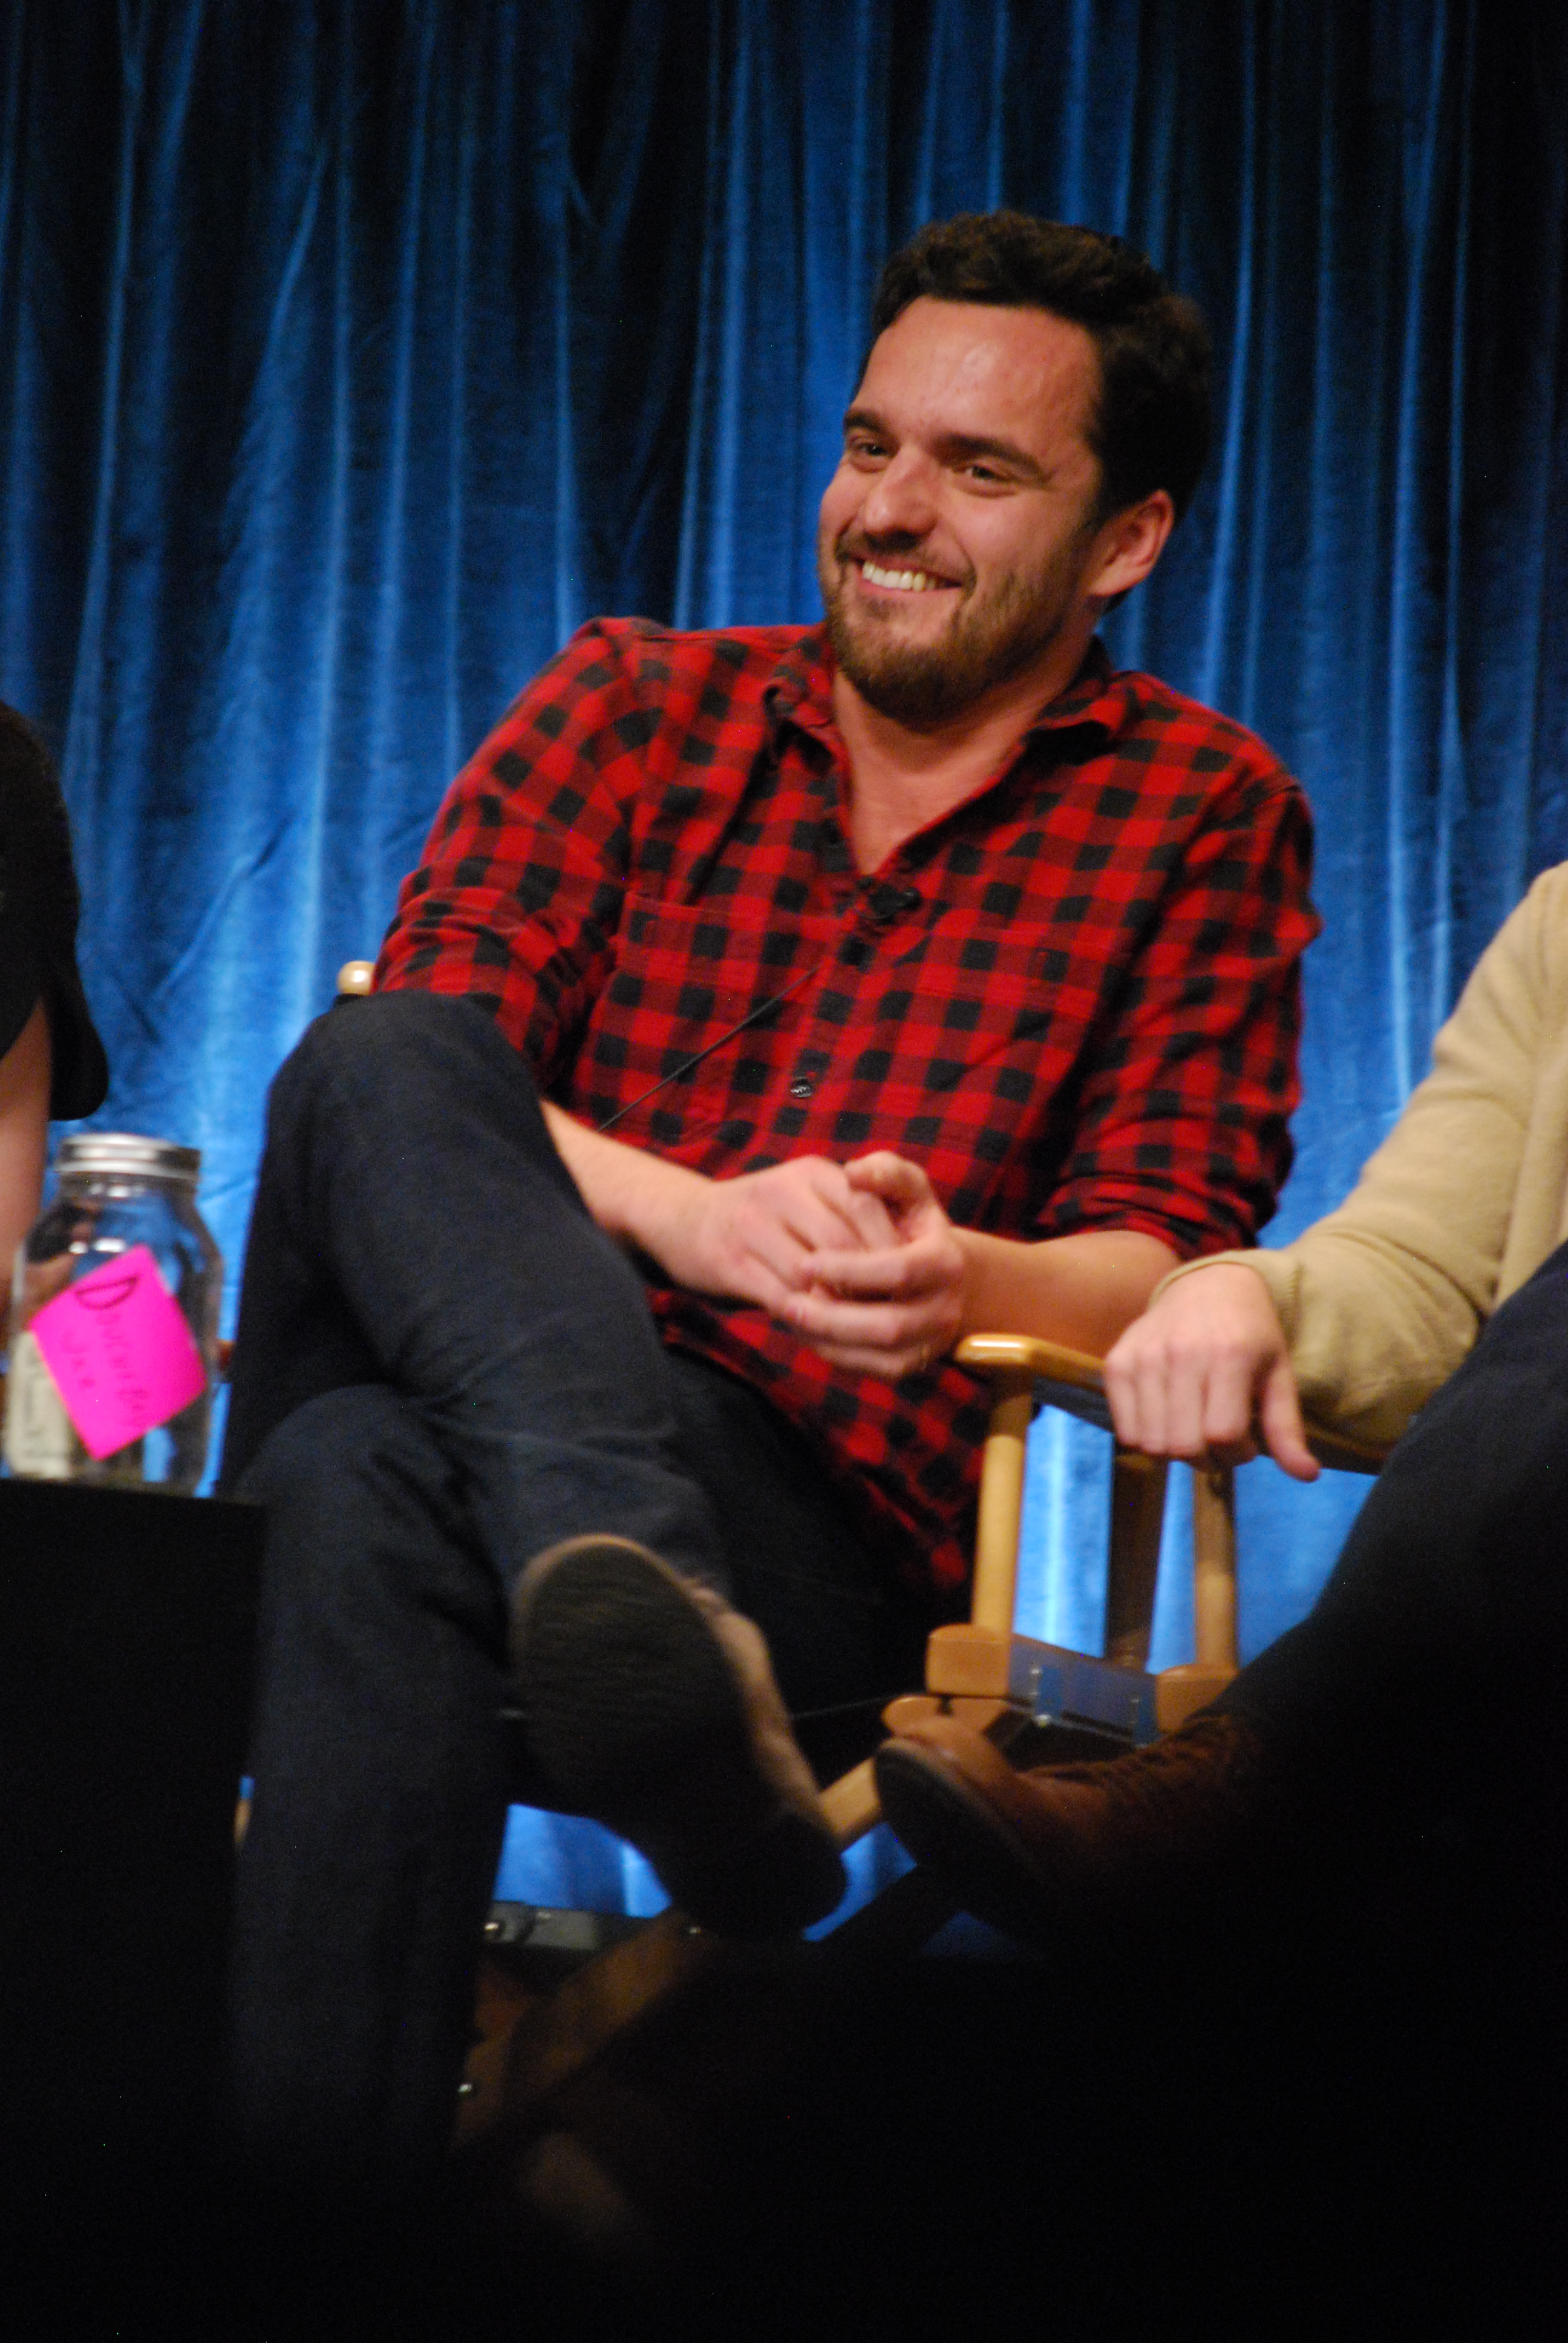 Jake Johnson (voice actor from Spider-Man: Into the Spider-Verse)